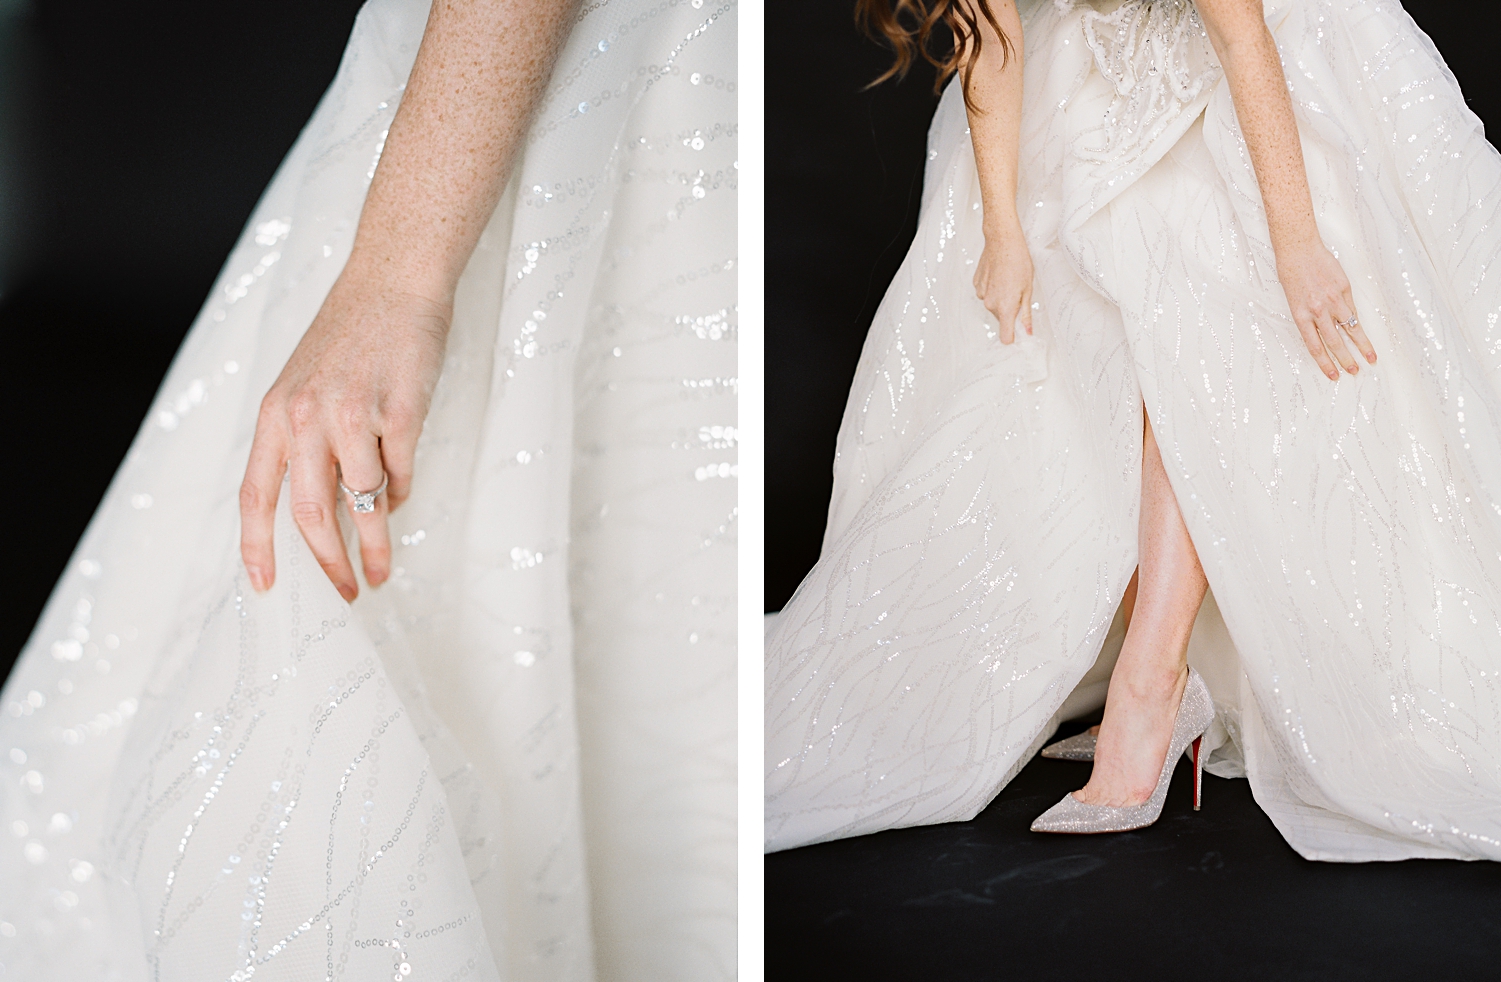 girls hands and feet in sparkling white wedding gown